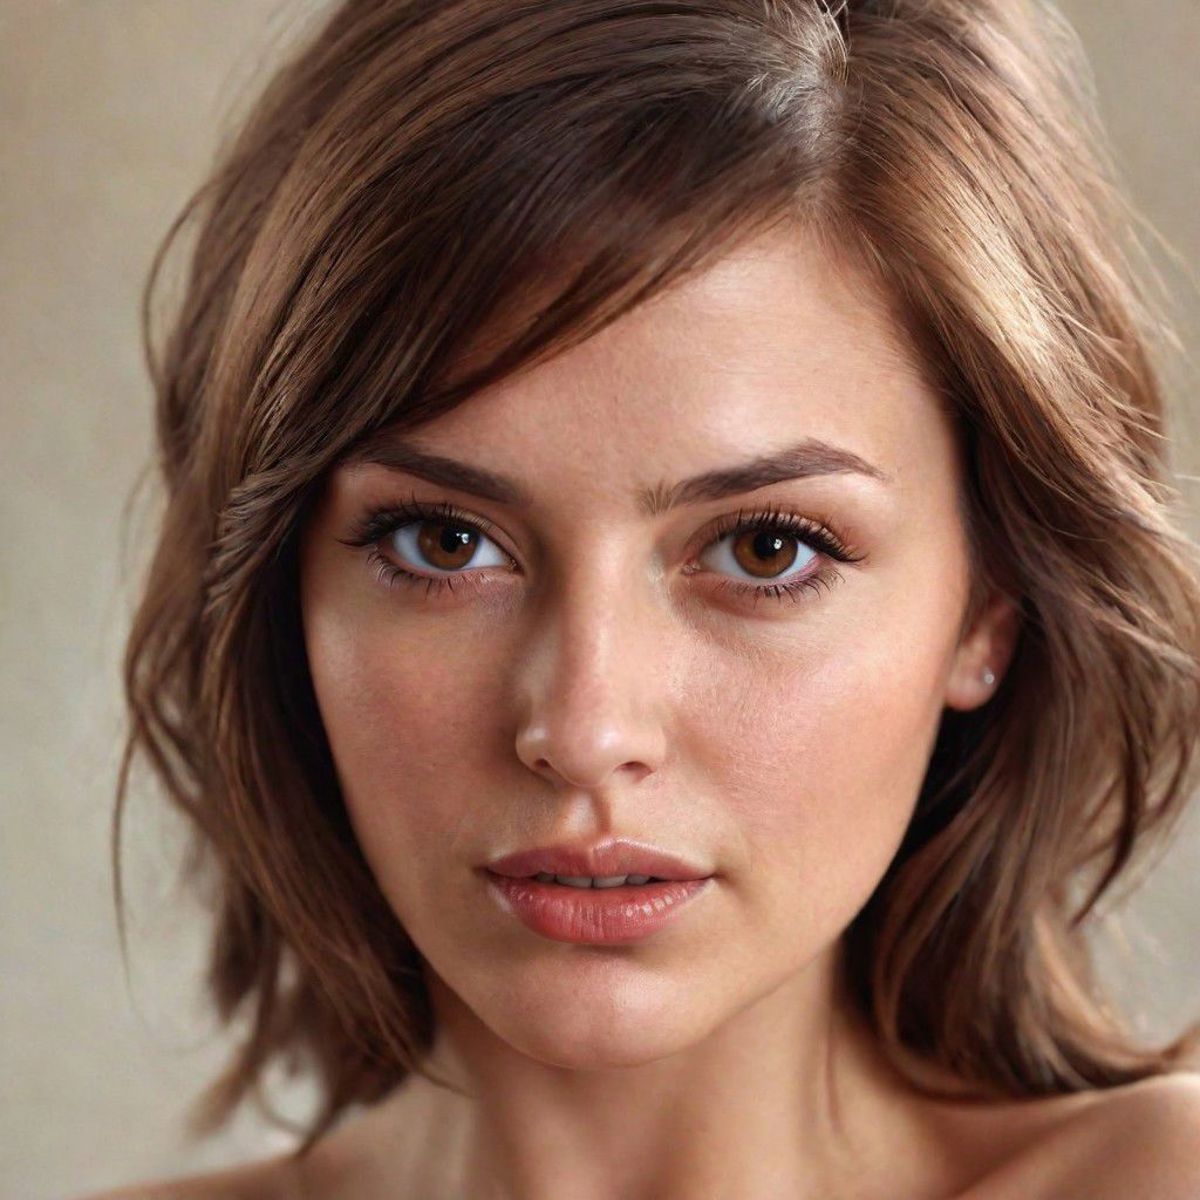 photorealistic portrait of a brown haired woman who is very sexy and cute